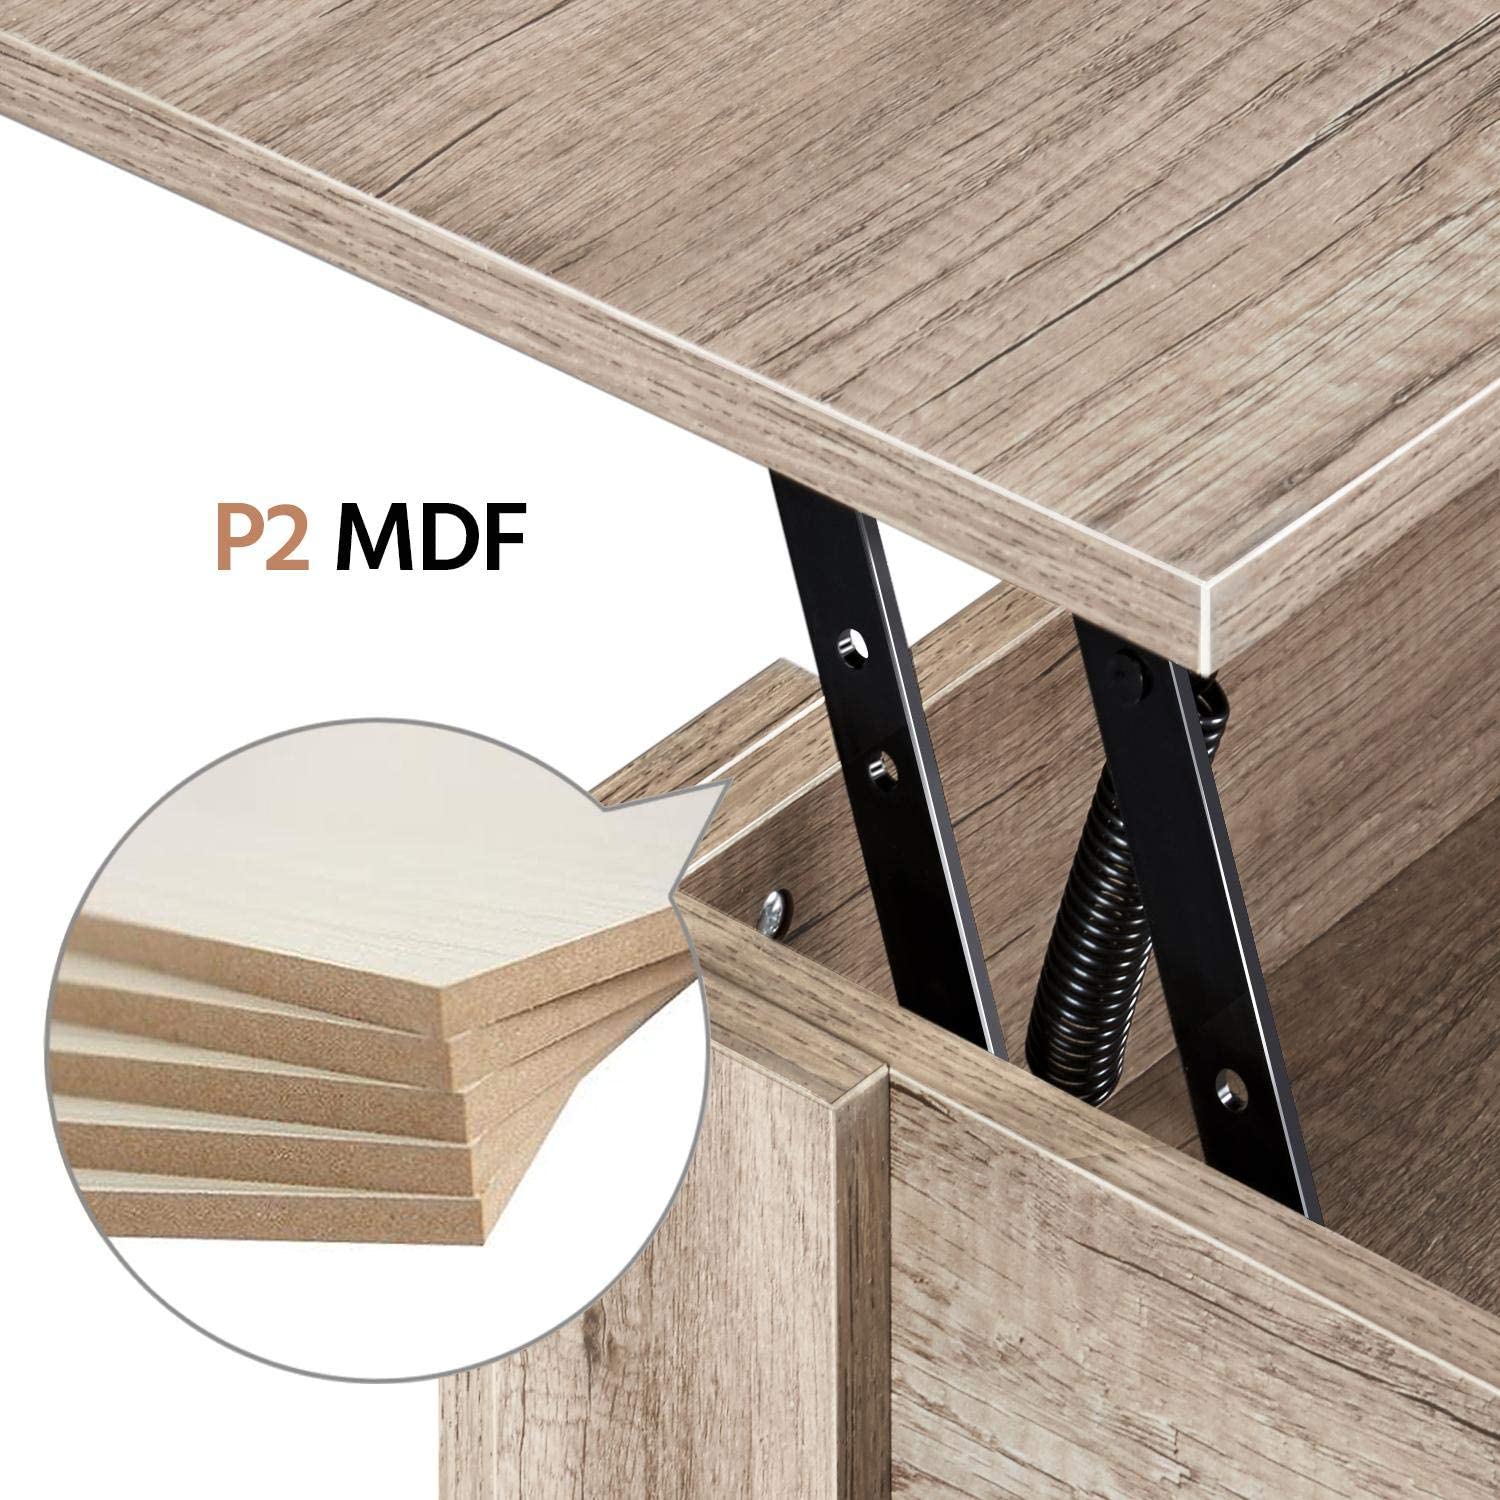 Modern Multifunction Square Adjustable Hidden Compartment Storage Wood Extendable Lift Up Top Whole Sale Coffee Table